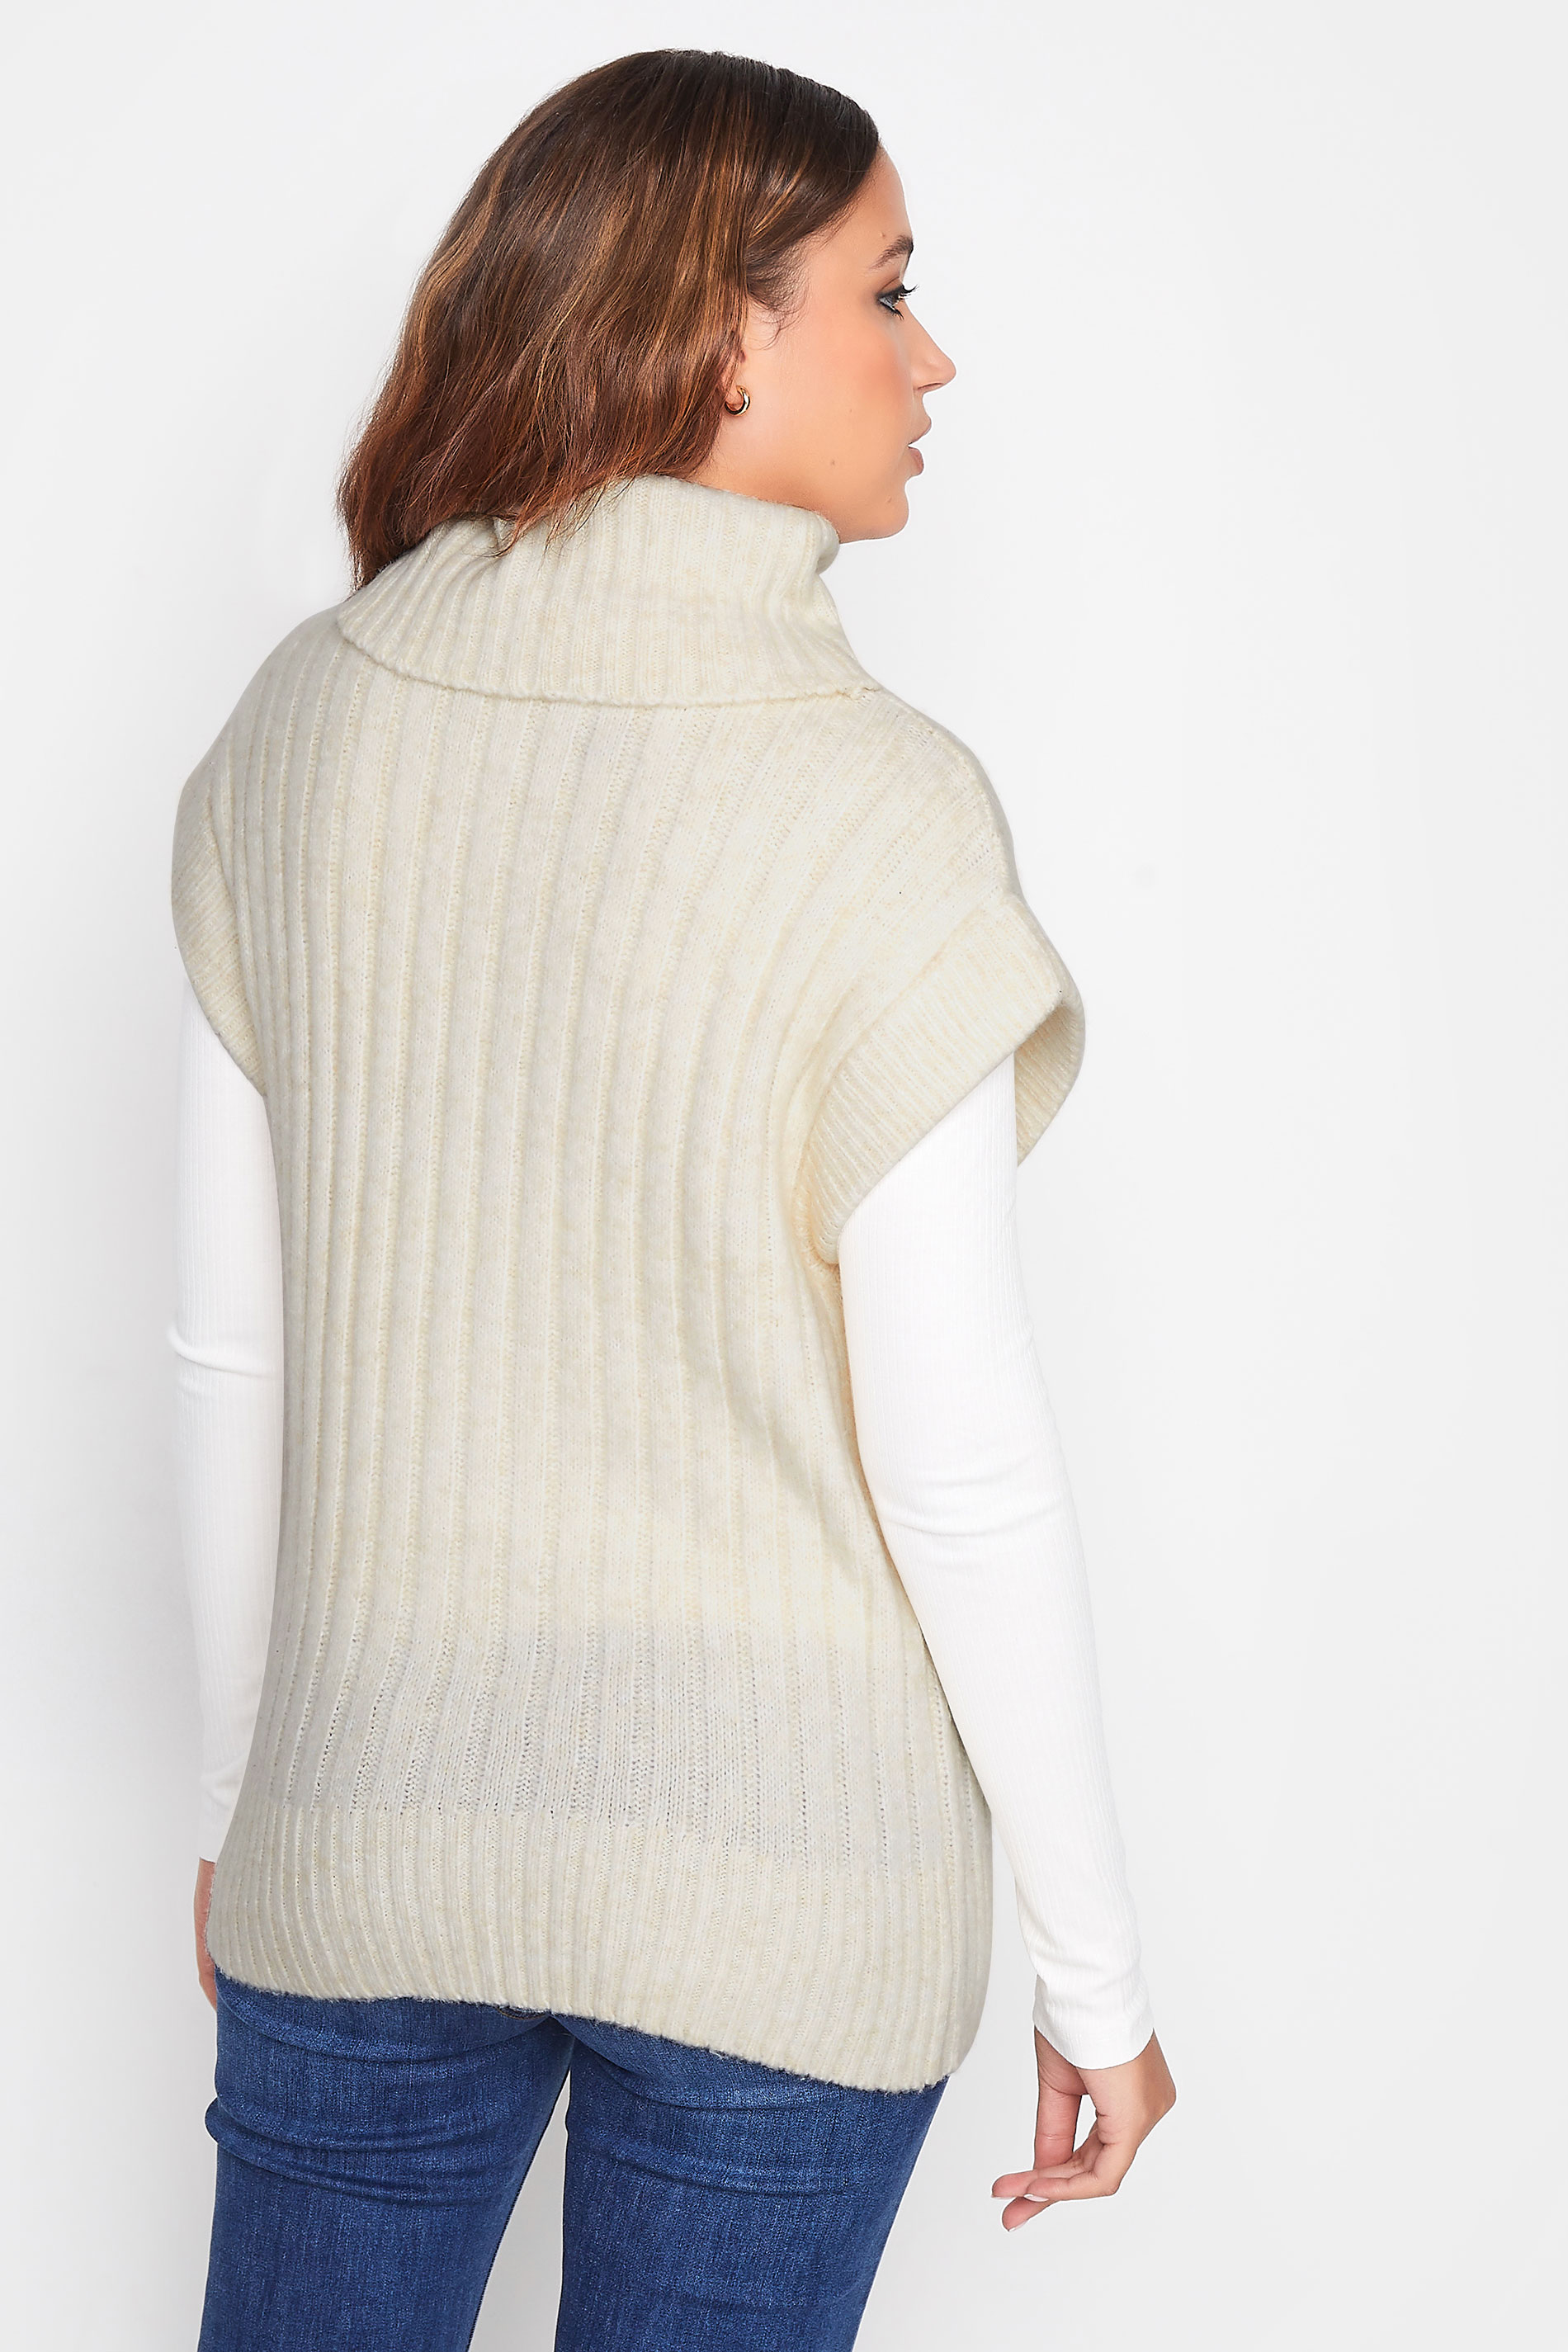 LTS Tall Ivory White Ribbed Roll Neck Knitted Sweater Vest | Long Tall Sally  3